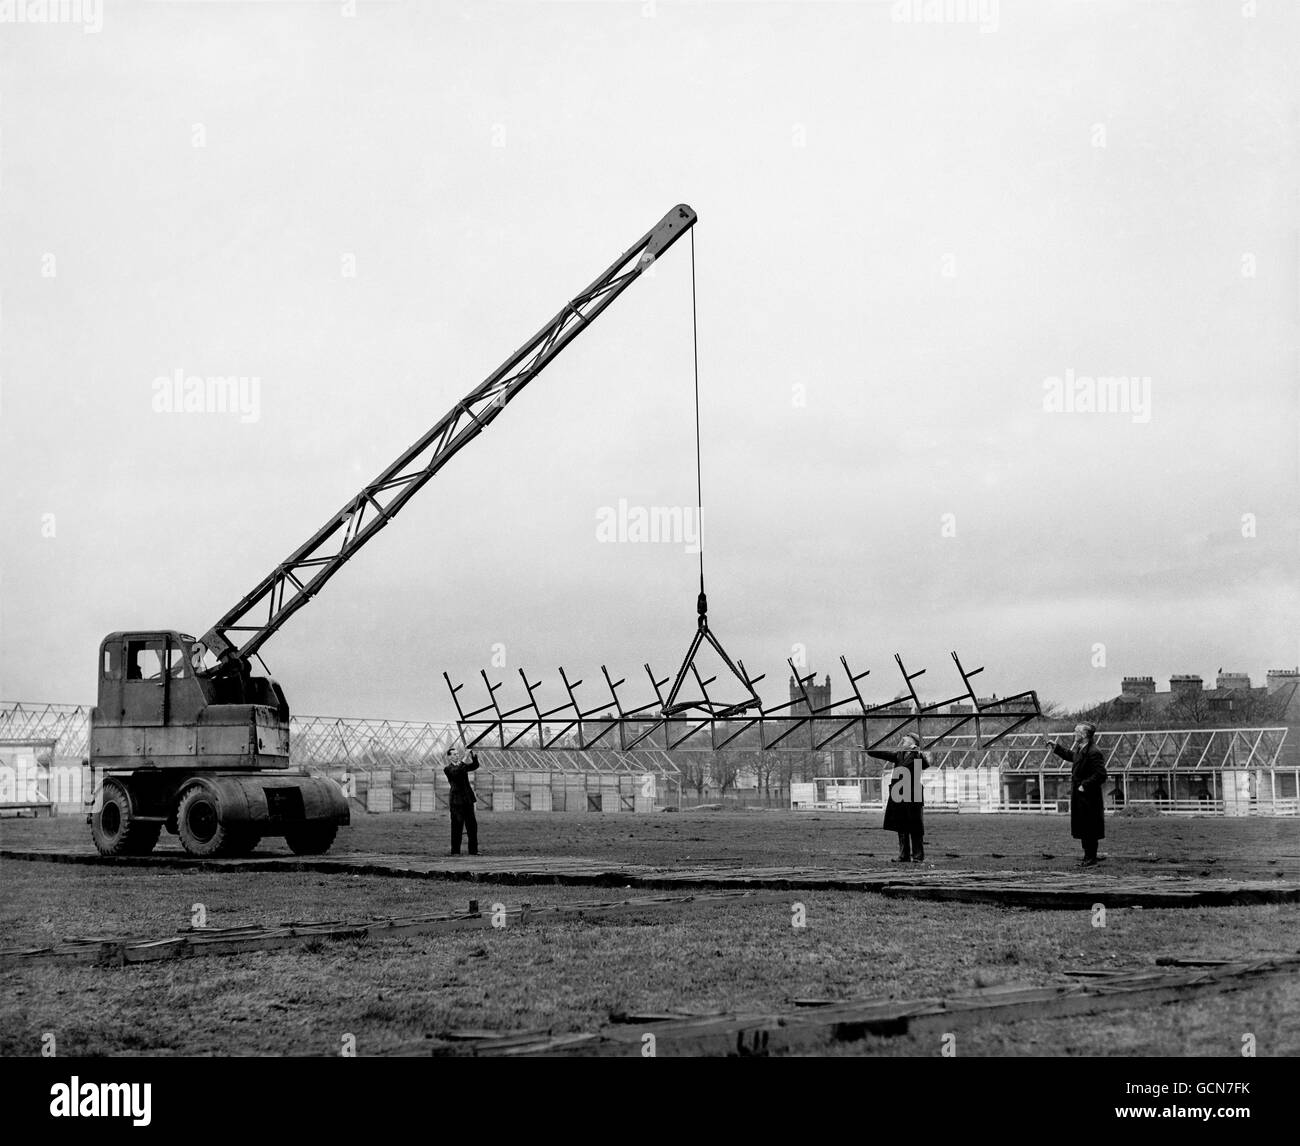 One of the big mobile cranes on the site lifting a grandstand cross beam. Stock Photo